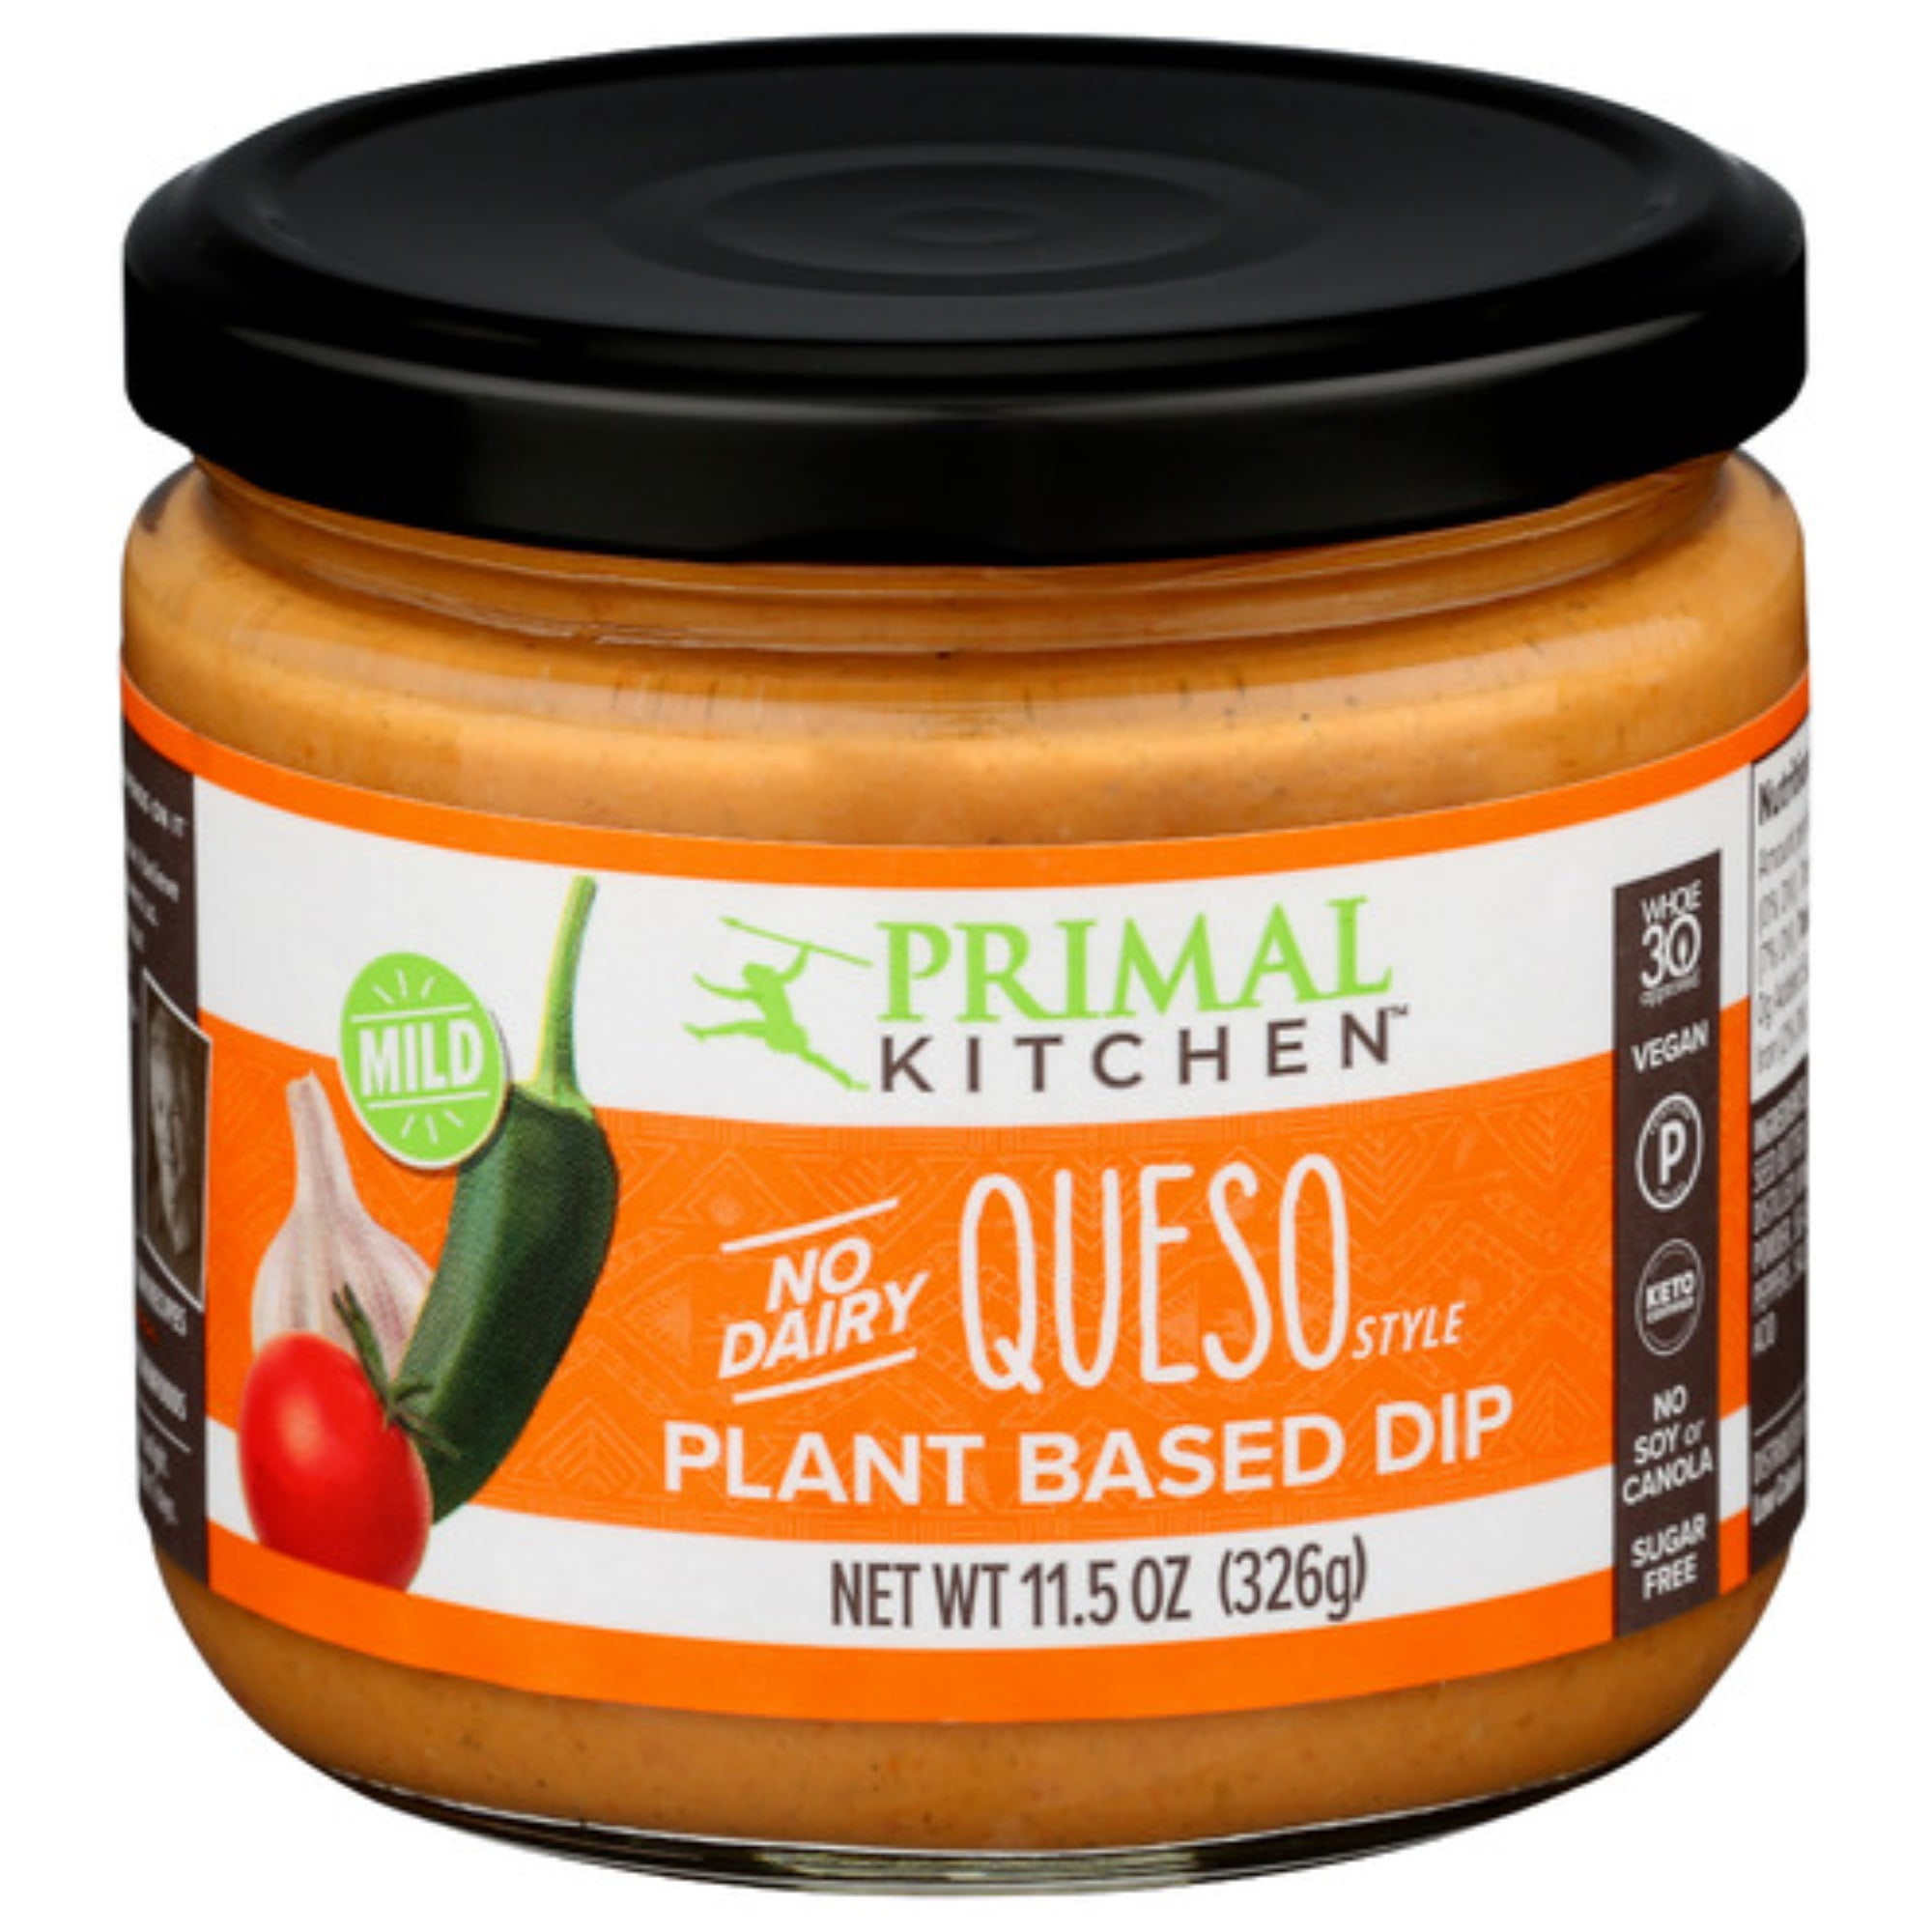 In queso emergency, reach for this dip! 🙌 NEW Primal Kitchen Queso Style  Plant-Based Dip is a delicious, no-dairy dream made with creamy pumpkin  seed, By Primal Kitchen